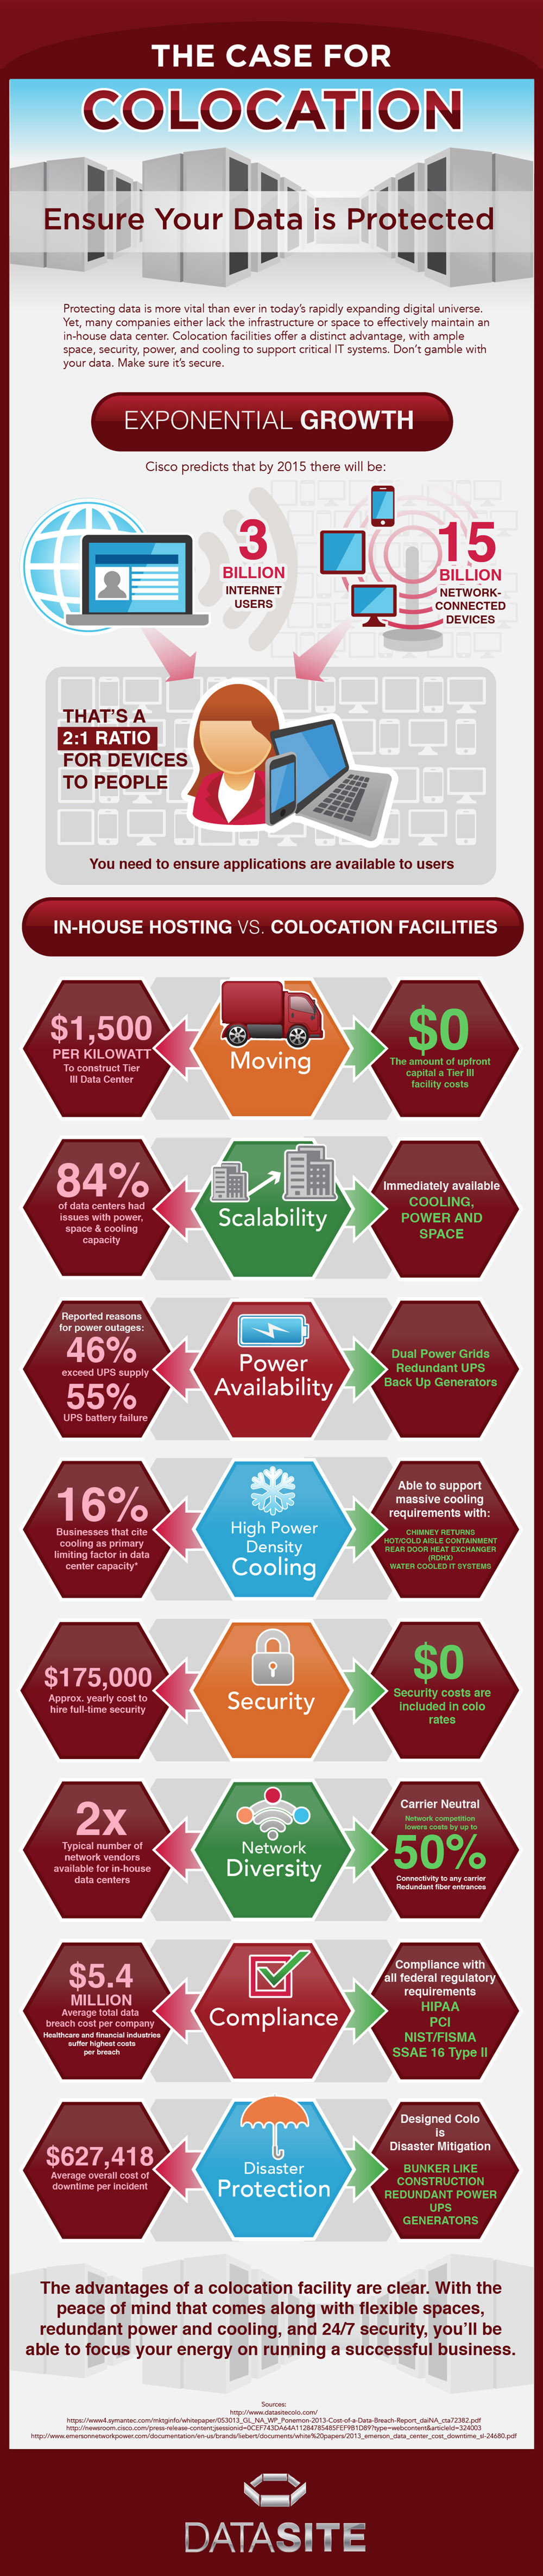 Colocation-centers-infographic-plaza